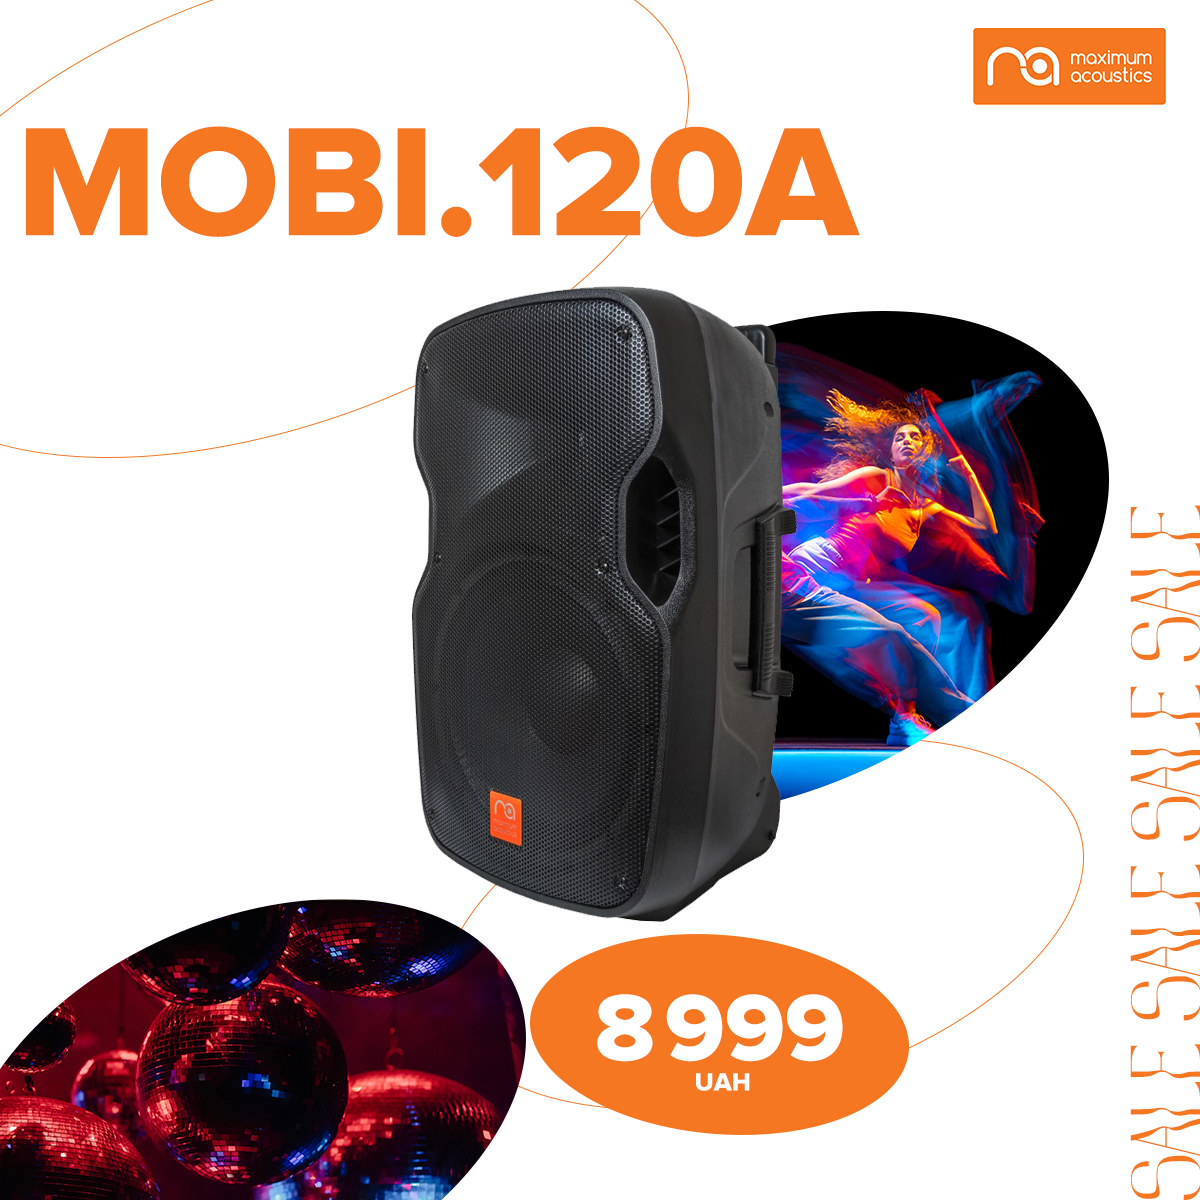 An active speaker system with a Mobi.120A battery is available for 8999 UAH